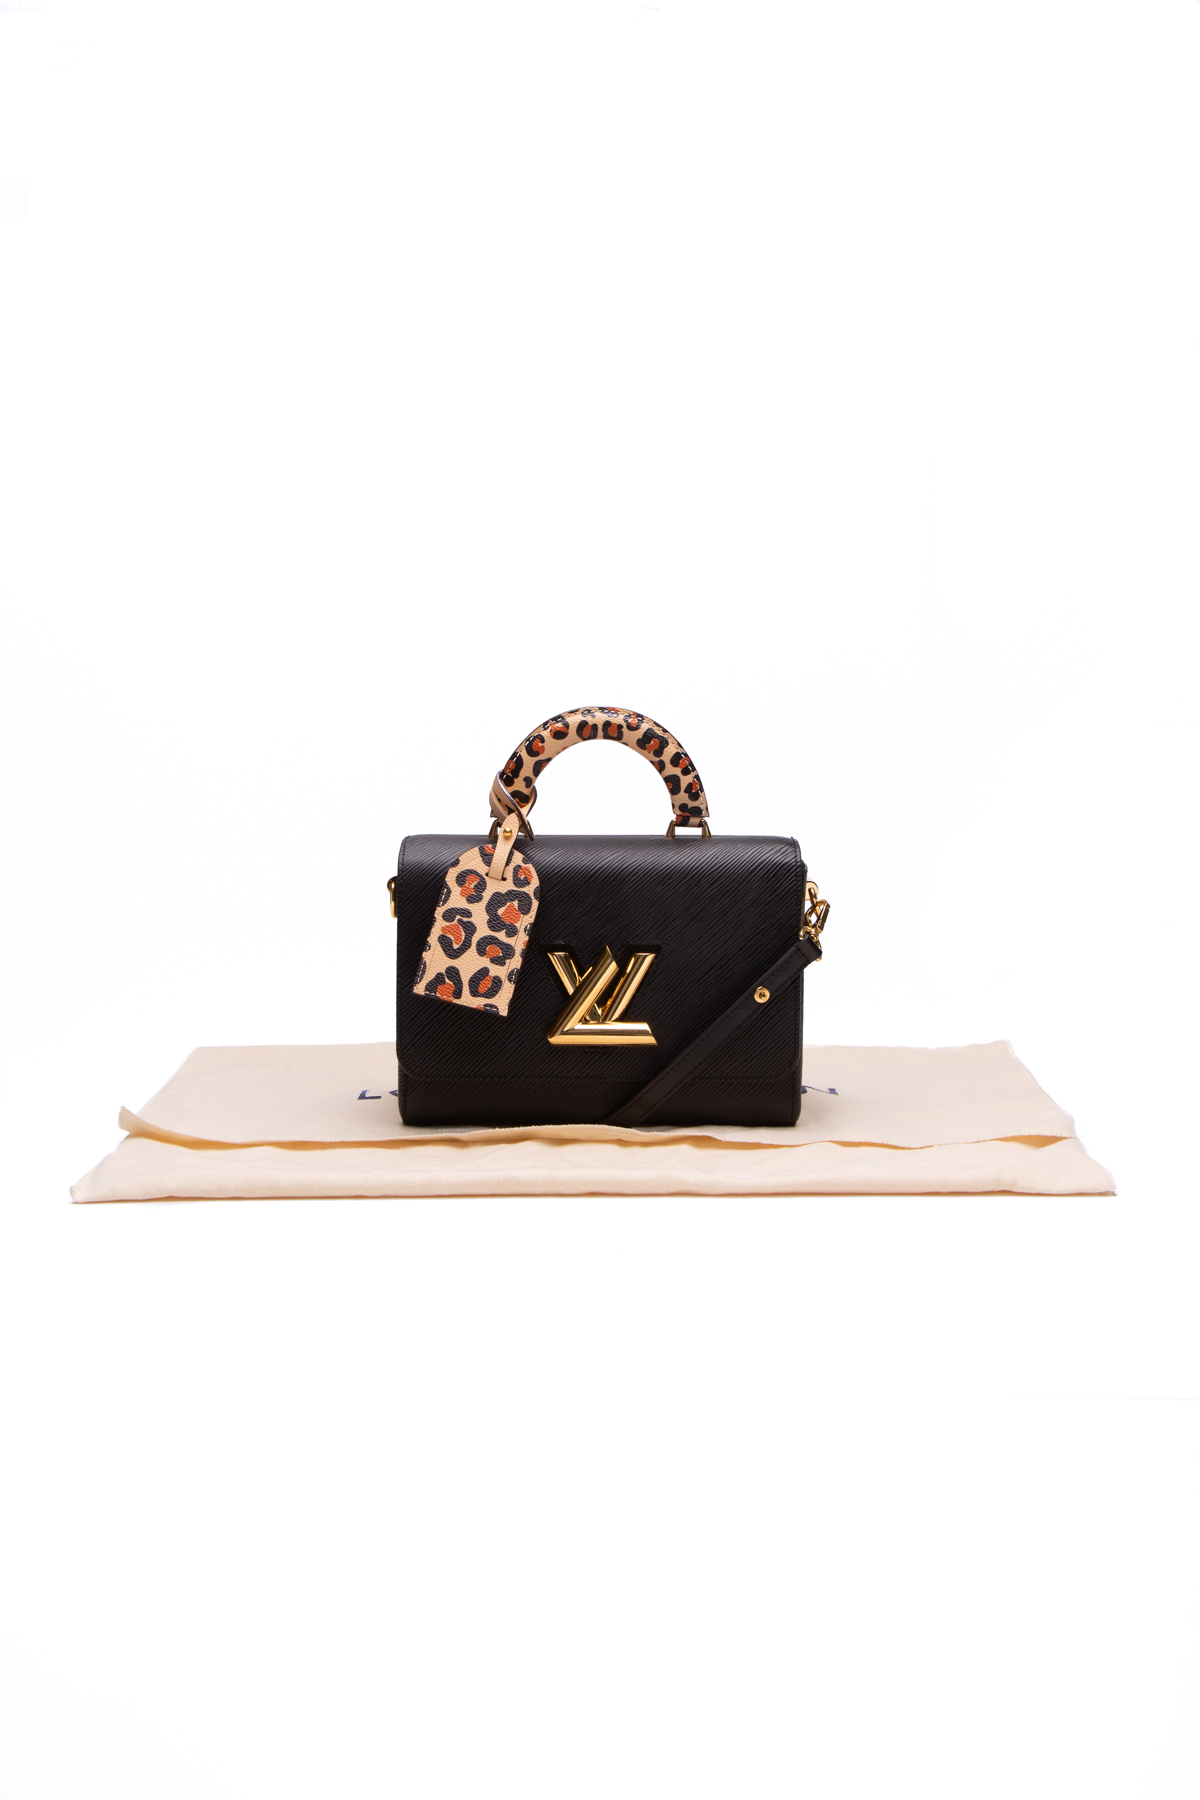 Louis Vuitton Twist Top Handle Bag Epi Leather with Wild at Heart Leopard  Print